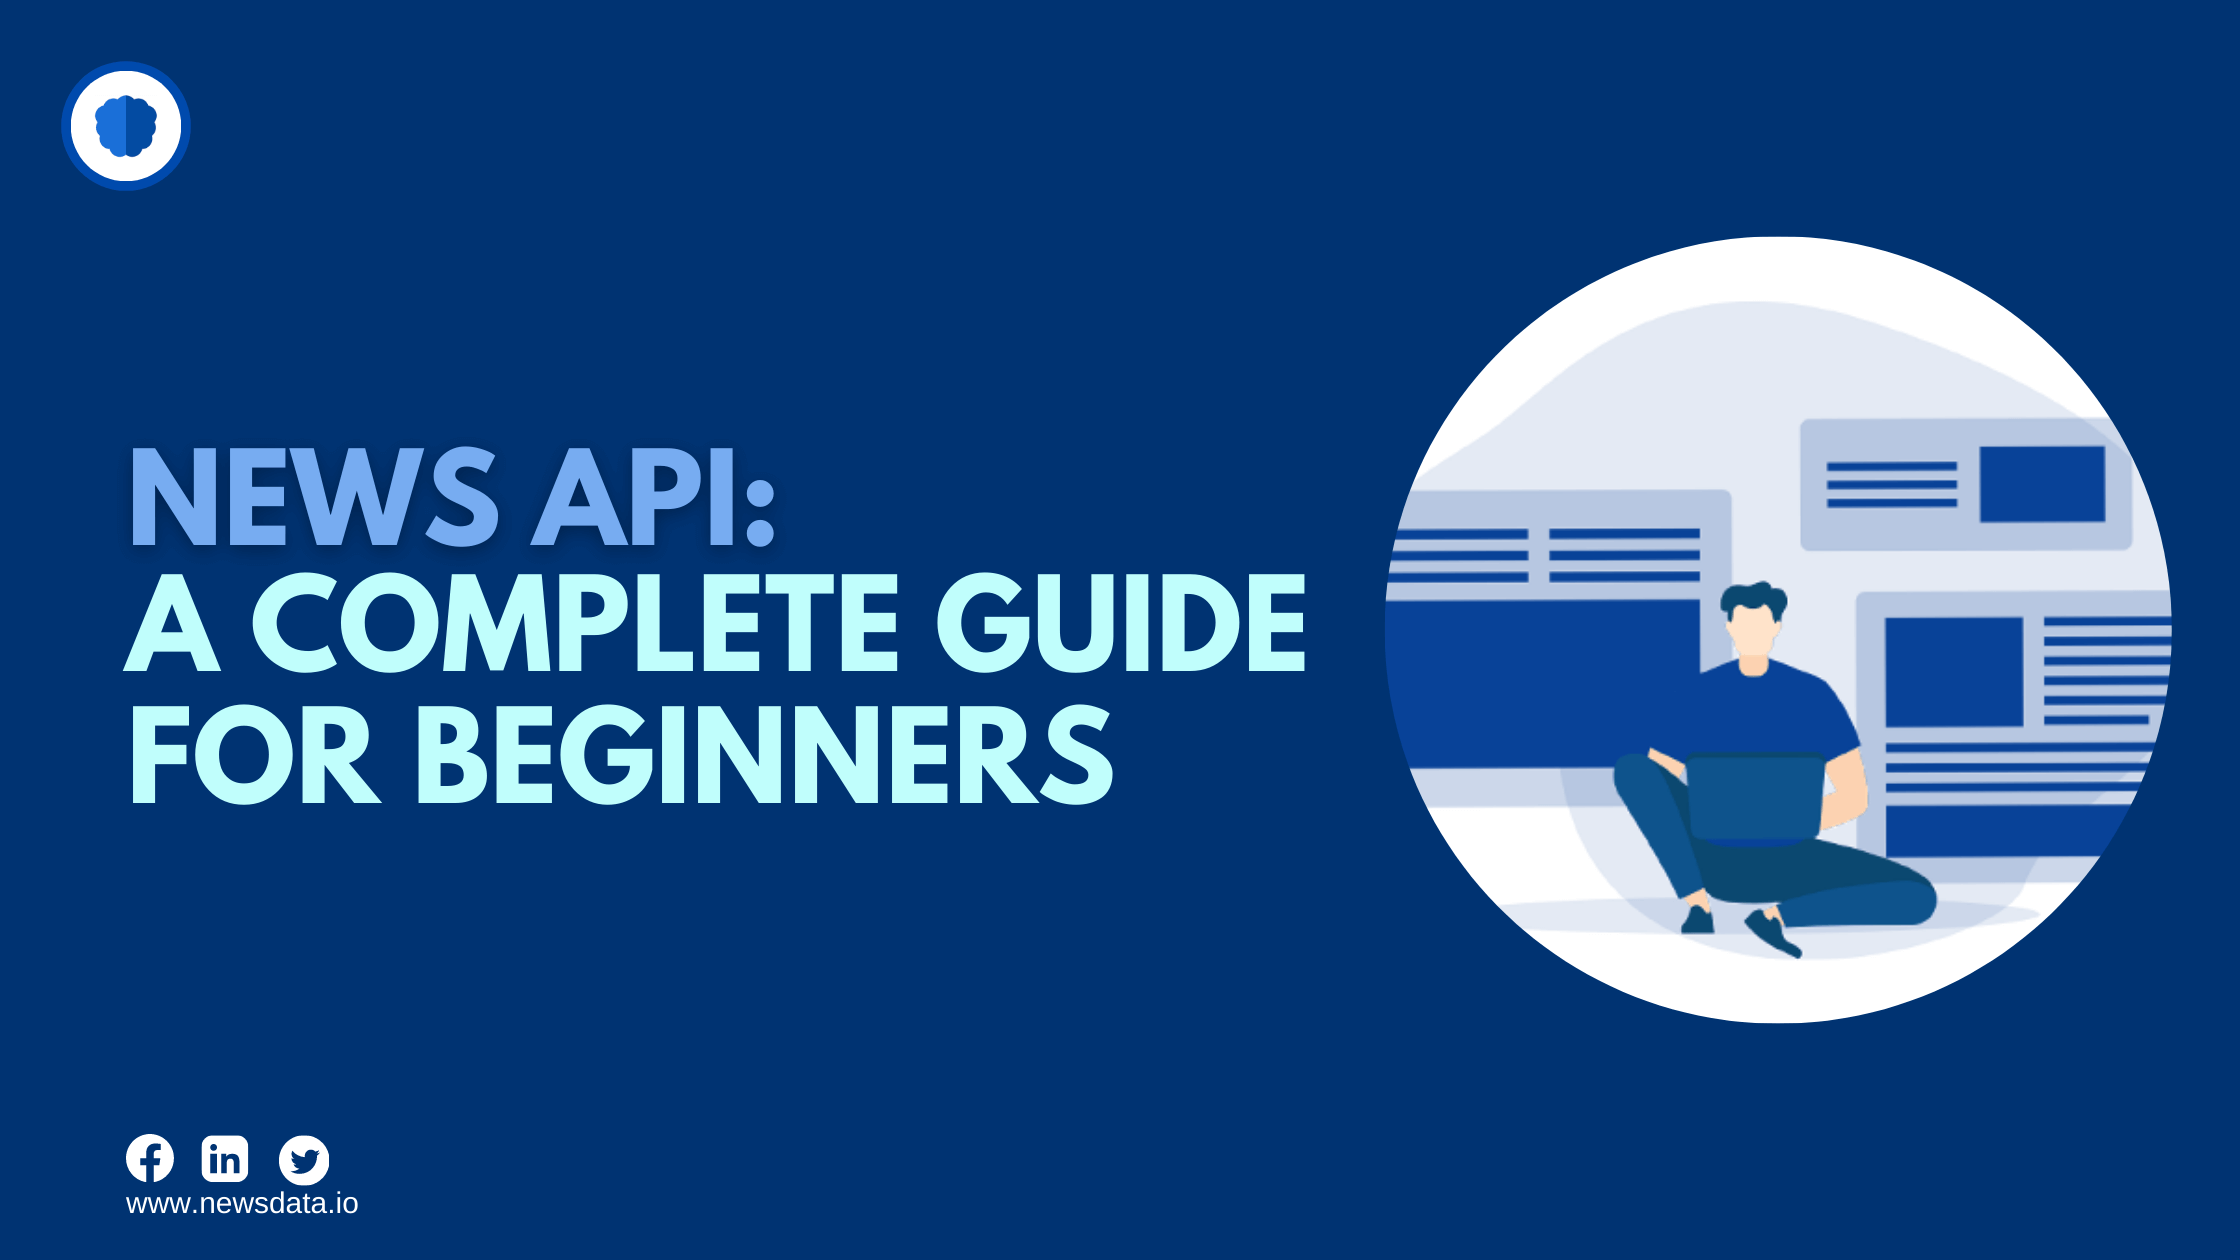 News API: A complete guide for beginner